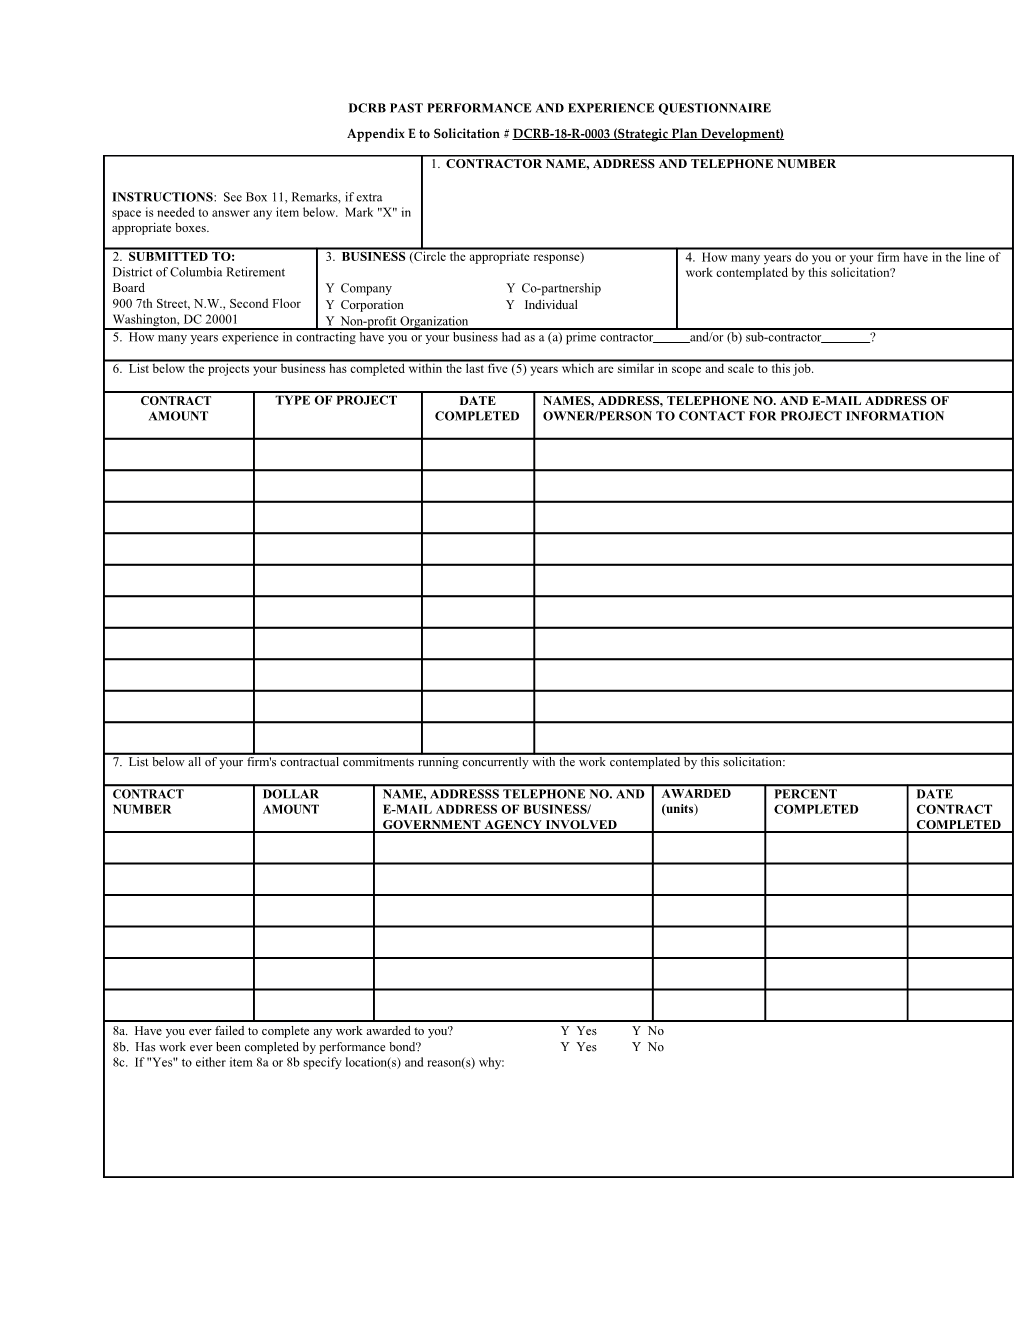 Contractor Experience Questionnaire Form